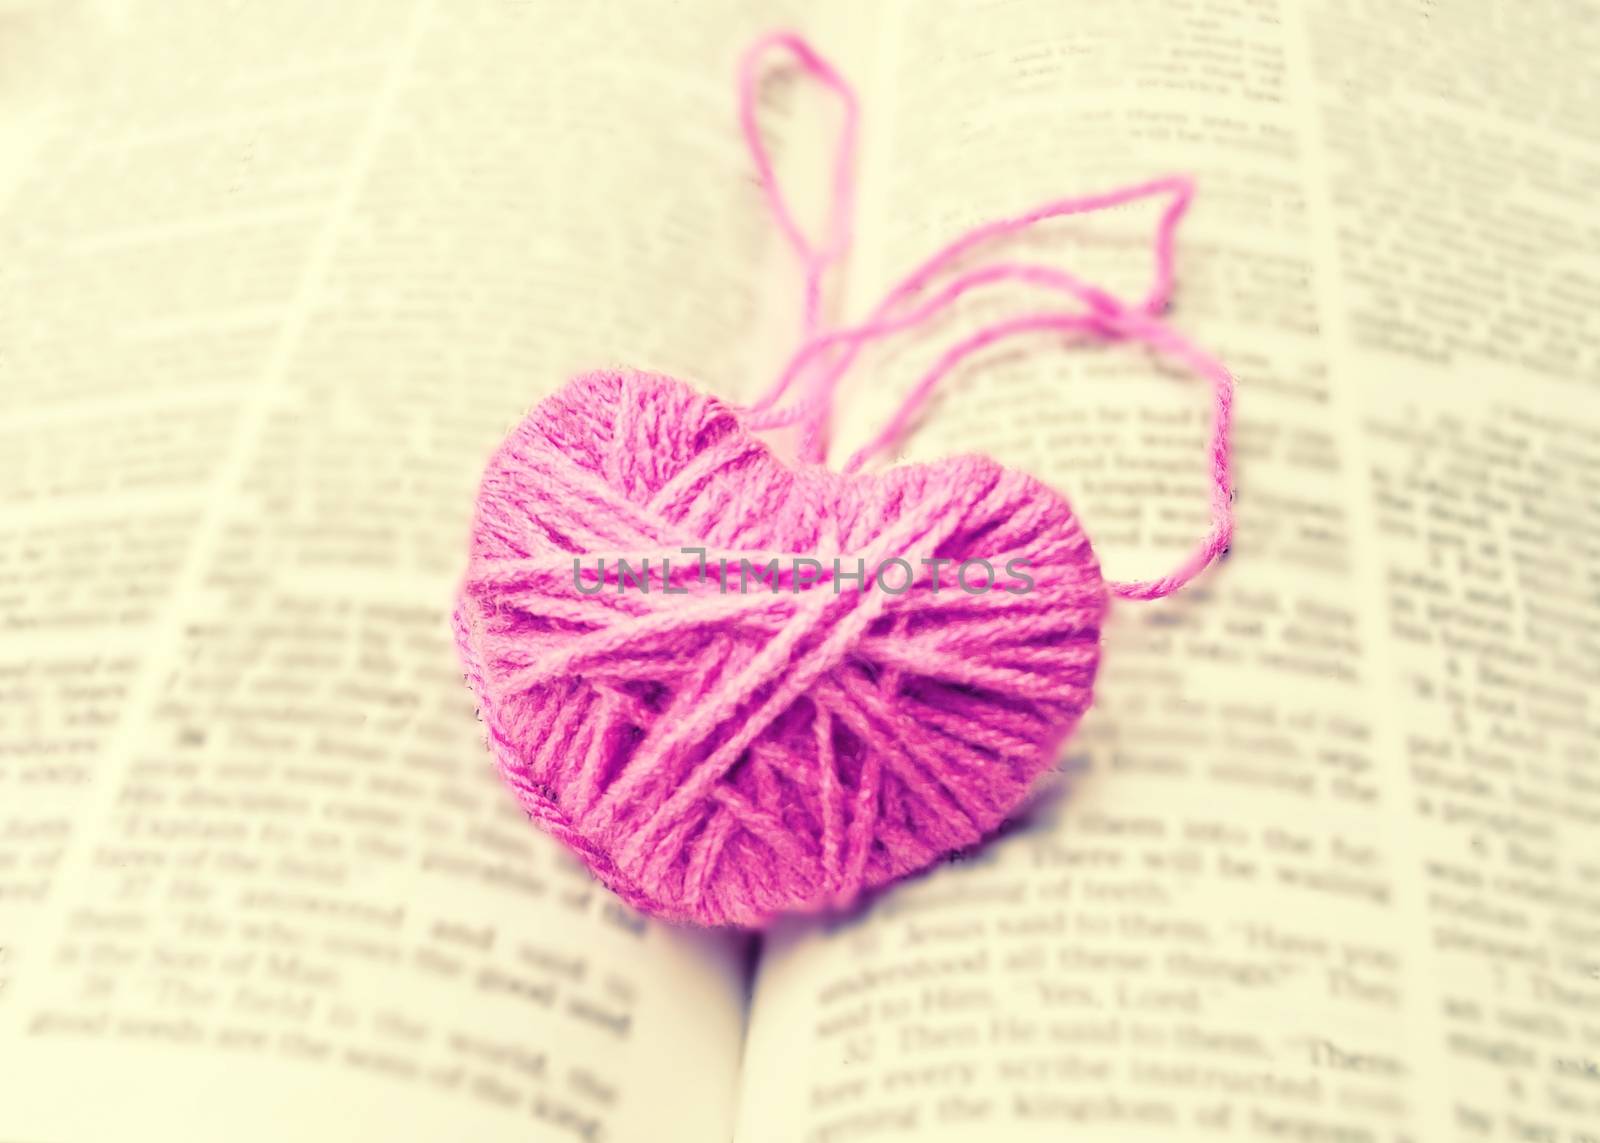 pink heart knitting wool put on the book, for valentine's day by rakoptonLPN